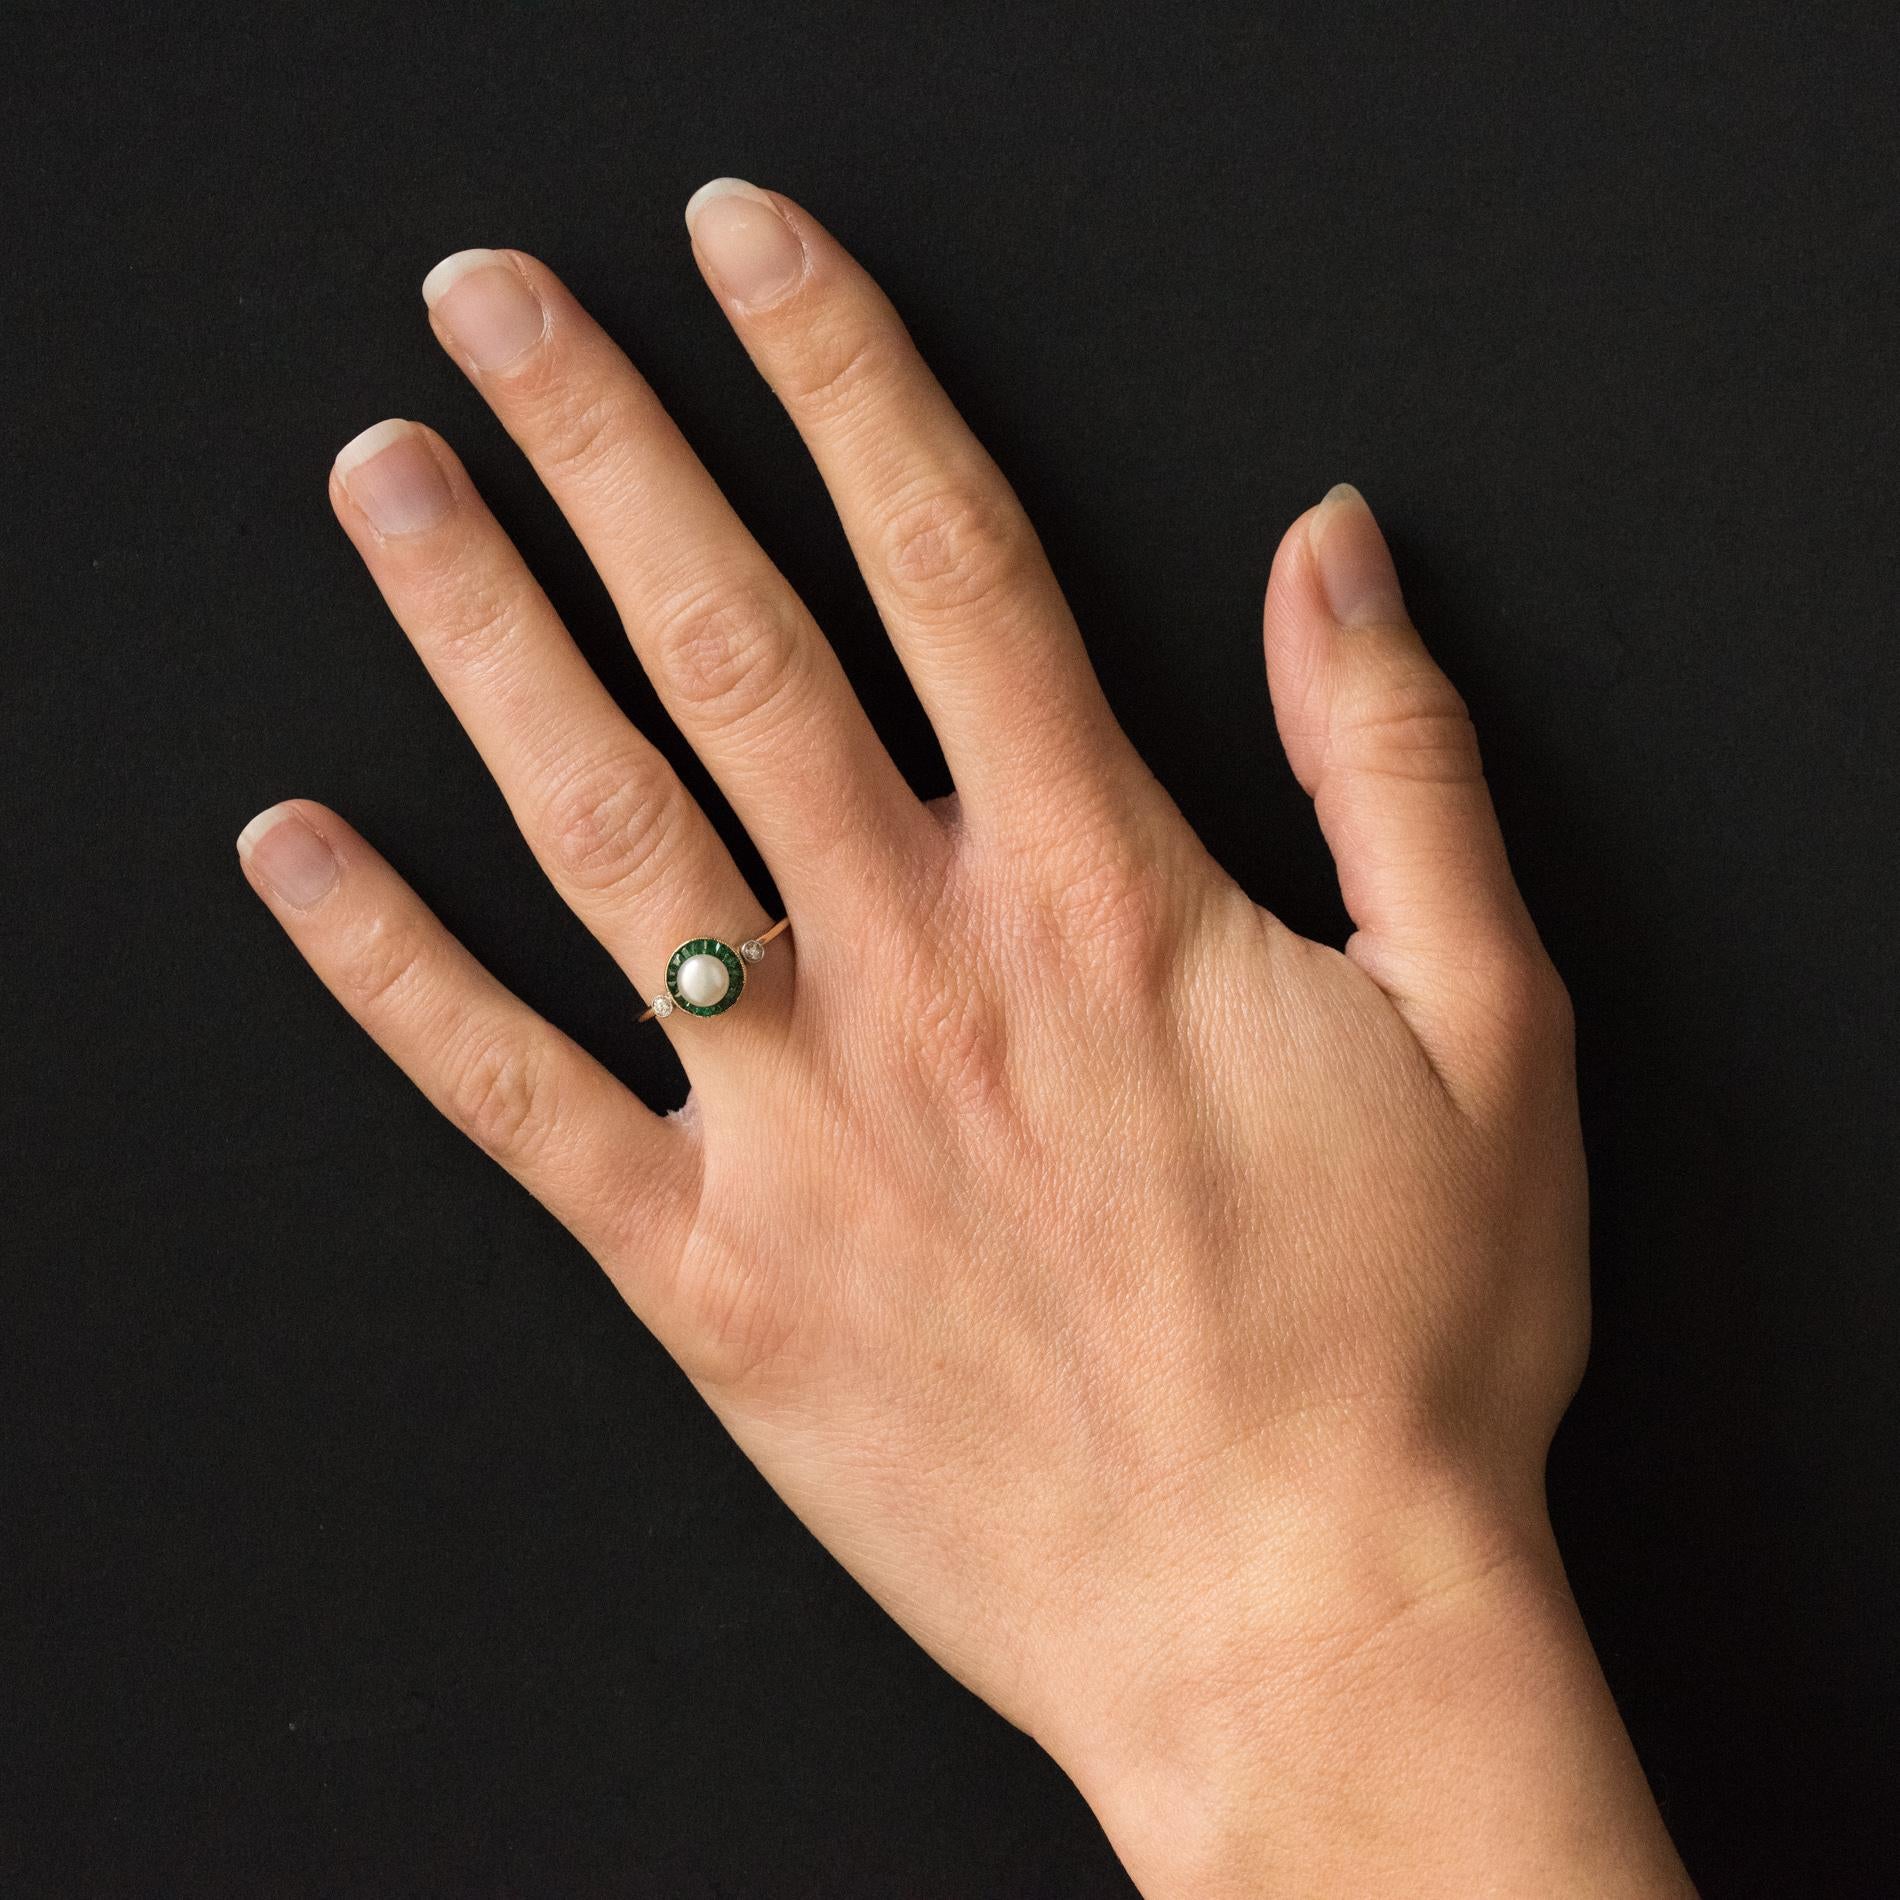 Ring in 18 karats yellow gold, eagle's head hallmark.
Lovely antique jewel, its round tray is set with a button natural pearl in an entourage of calibrated emeralds. On either side, on the start of the ring are beaded closed set 2 x 1 brilliant- cut